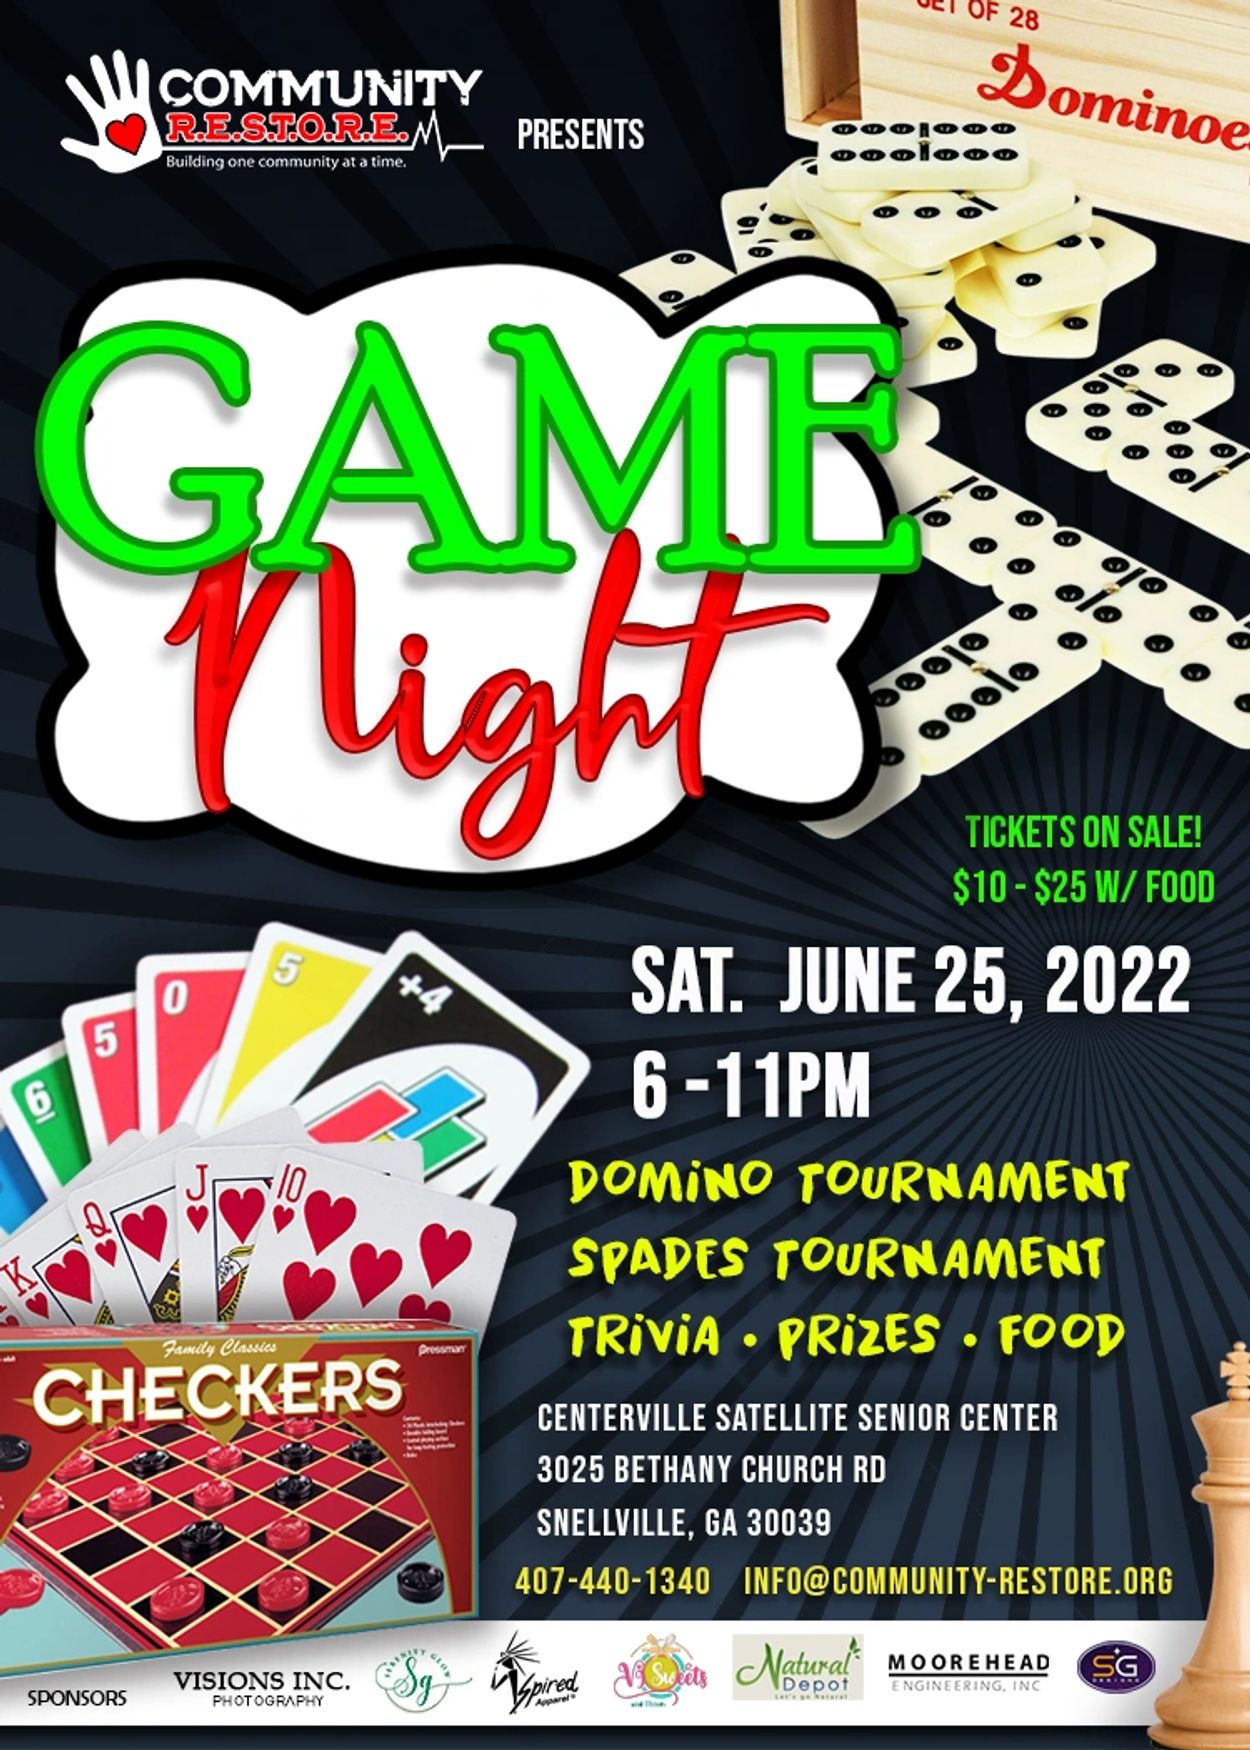 Click here for tickets to our Game Night Fundraiser or Donate to our Career Exploration Workshop in 